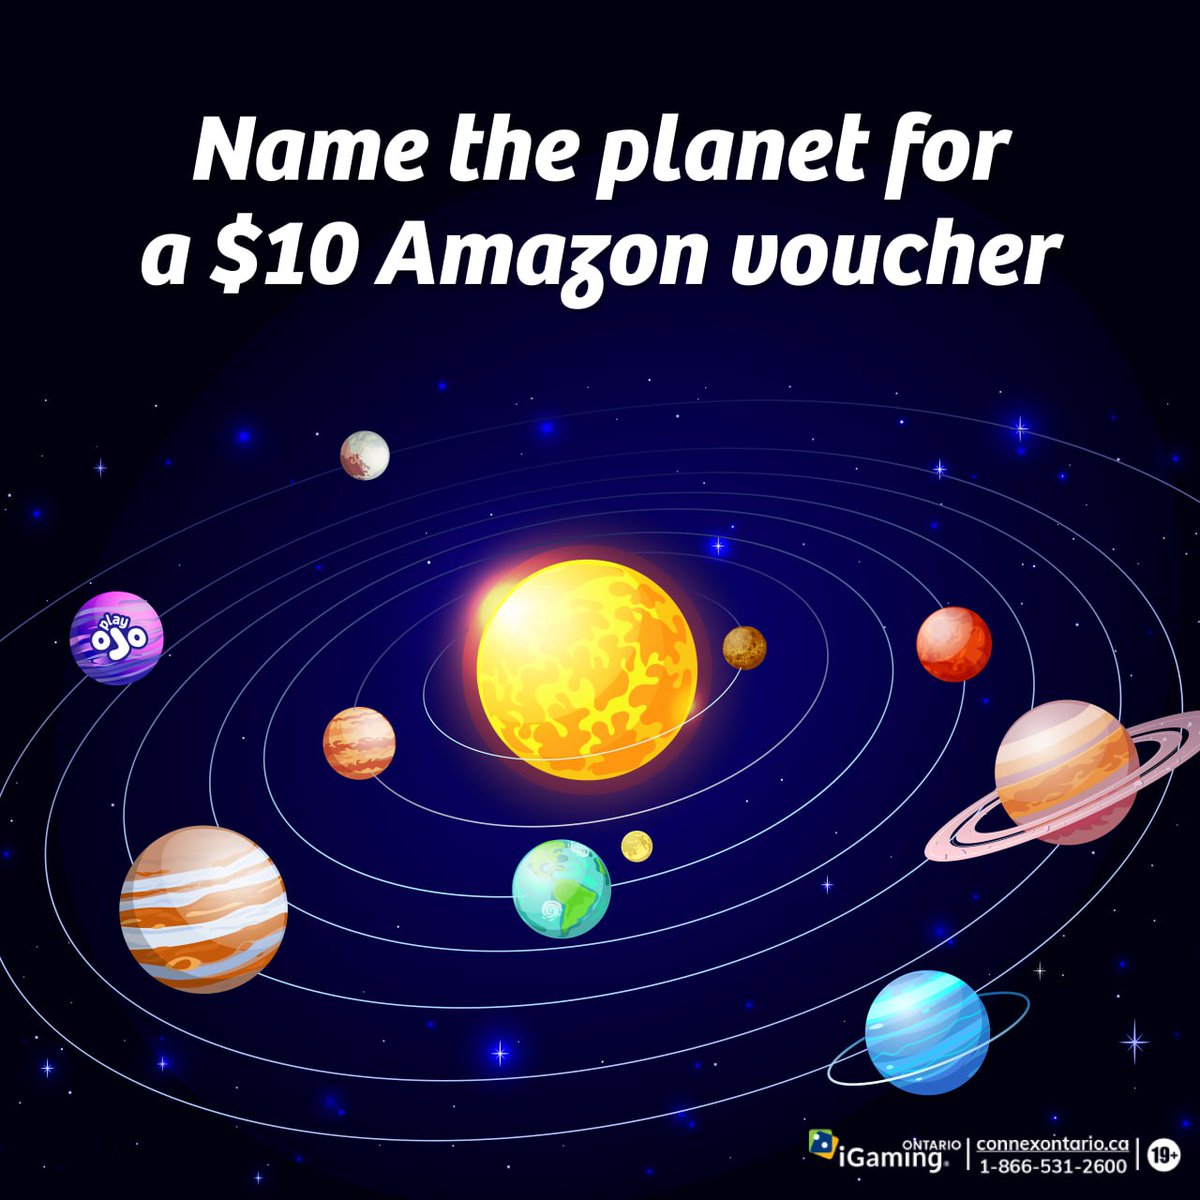 PlayOJO is out of this world - literally! 🪐
Comment which planet has had an OJO makeover for the chance to be one of six players to get a $10 Amazon voucher.

Six randomly selected winners will be announced on November 1st.
#planettrivia #giveaway #amazongiveaway #giveawaycanada